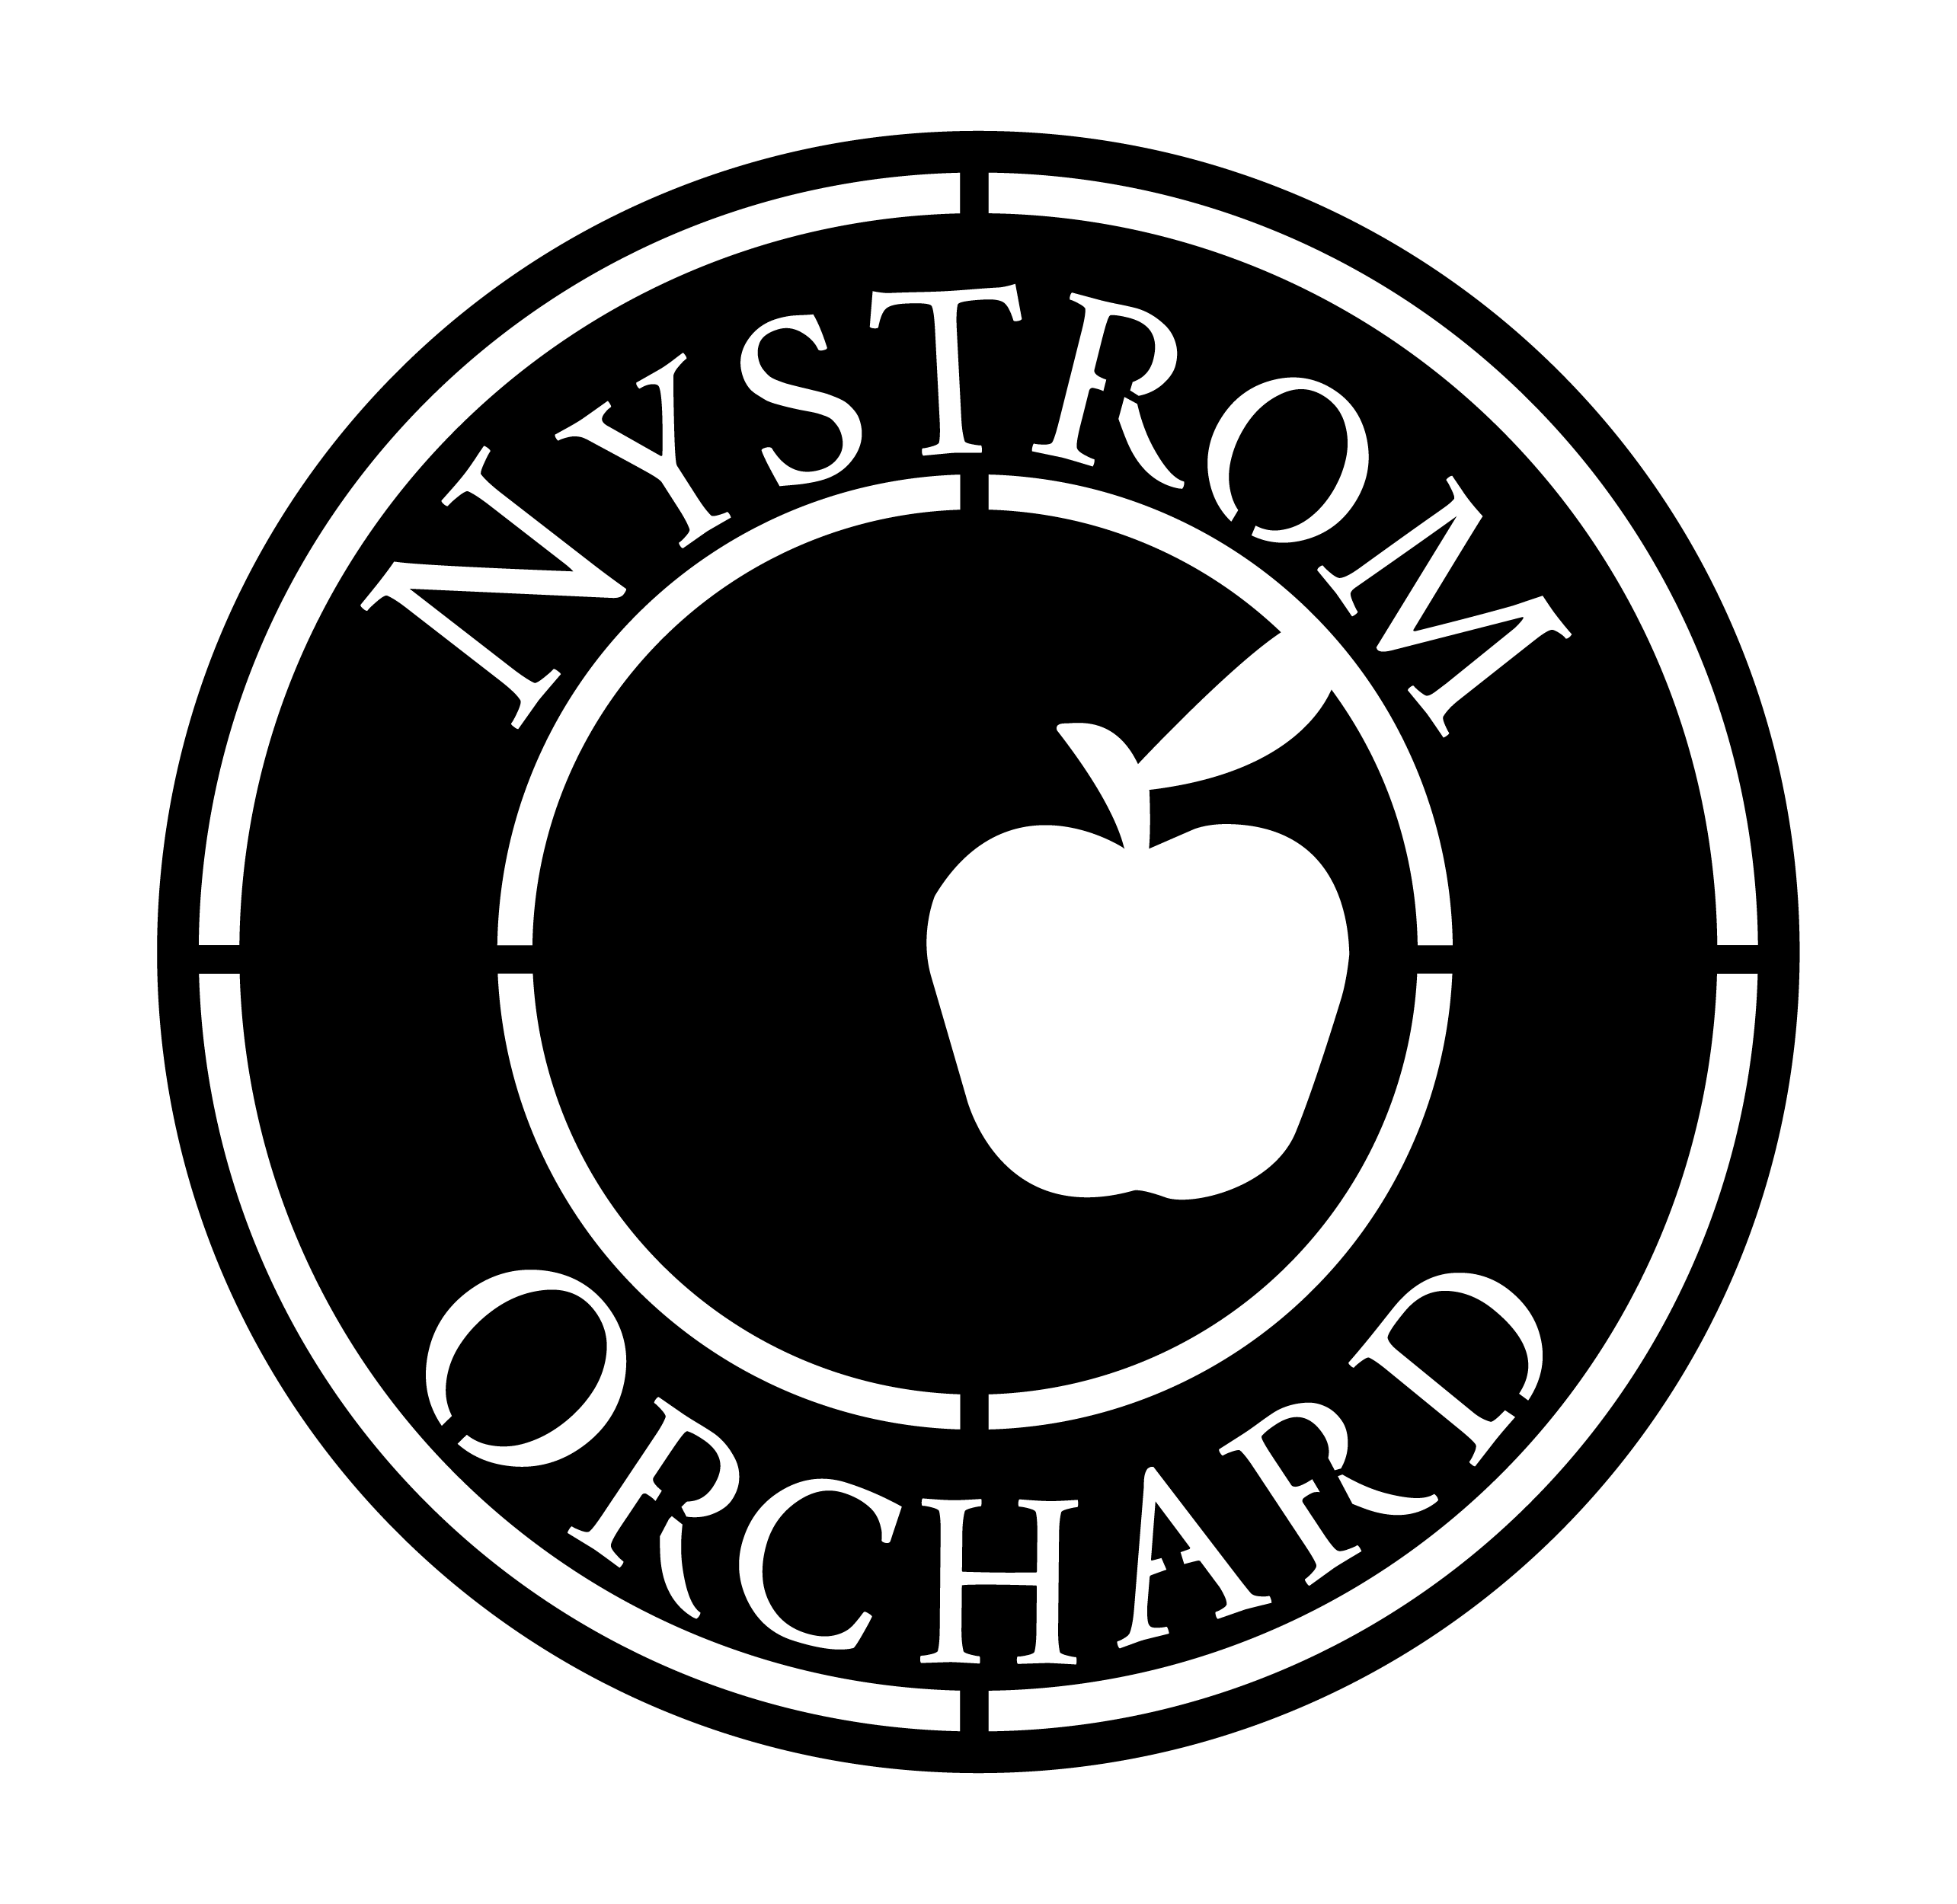 Nystrom Orchard